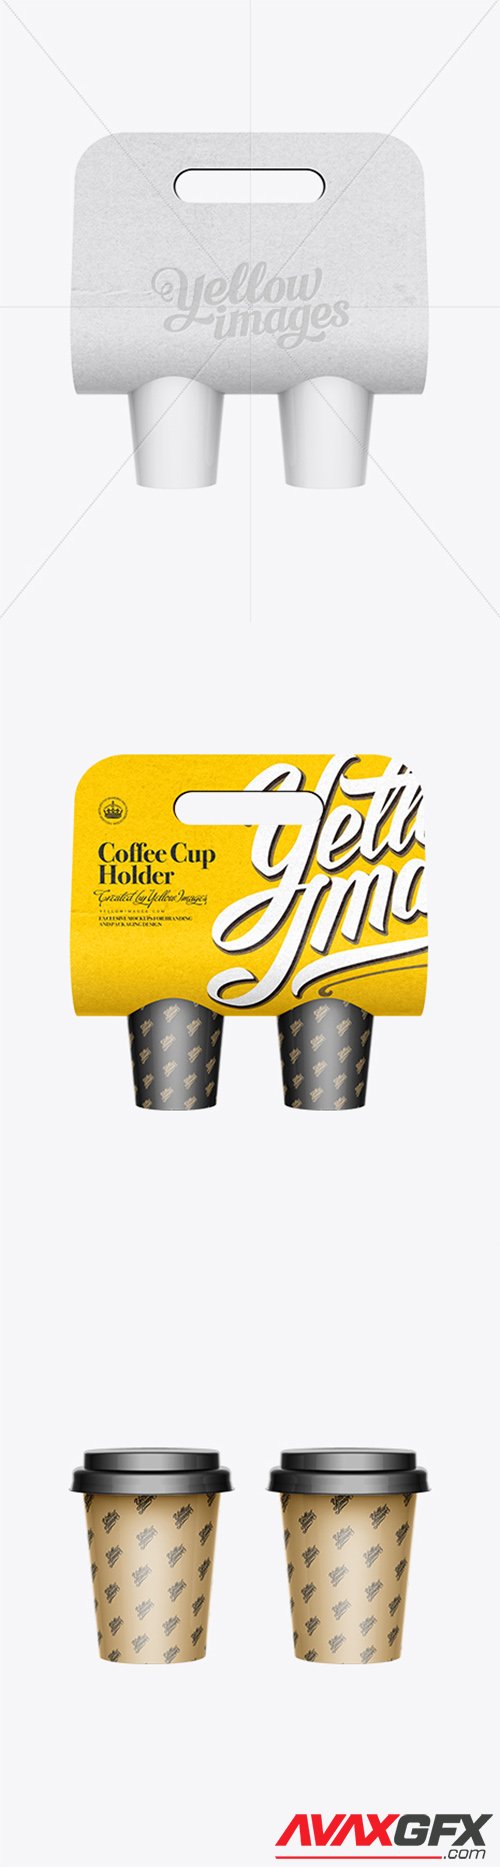 Paper Coffee Cup Carrier Mockup 11597